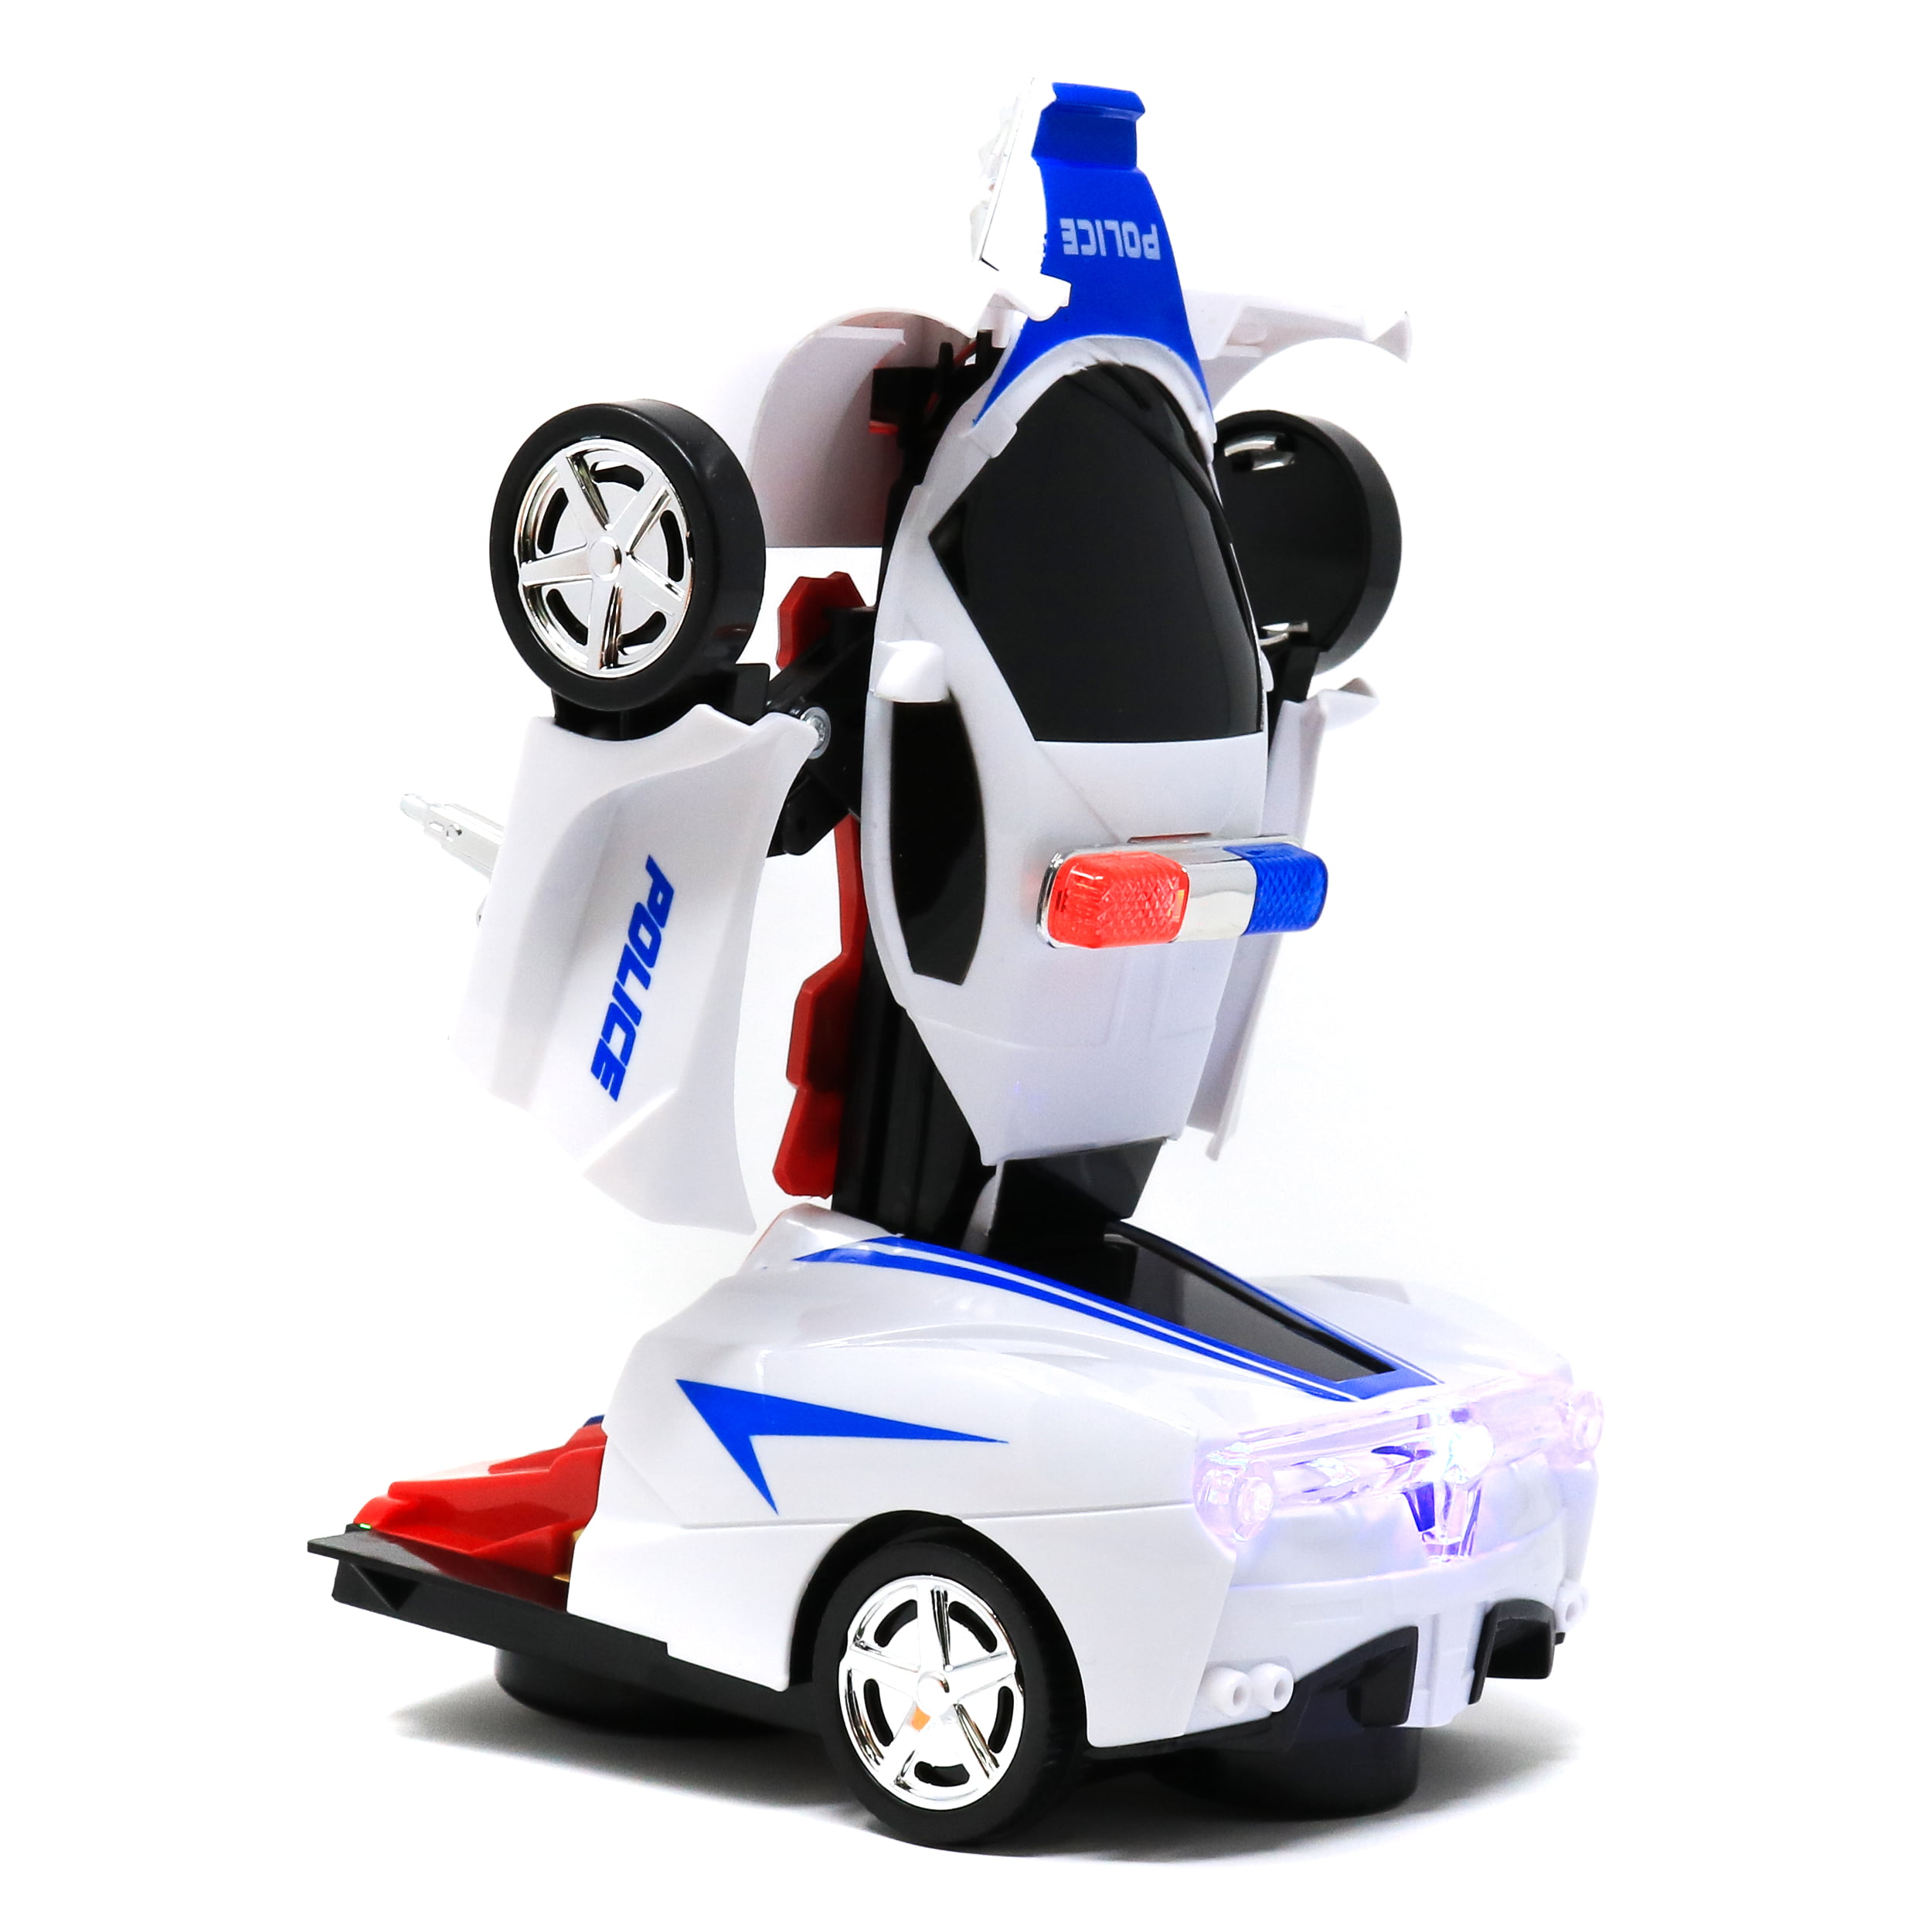 Toytykes Robot Police Car Bump and Go Action Comes with Lights and Sounds Great Gift Idea from Police Car to Robot and Vice Versa 